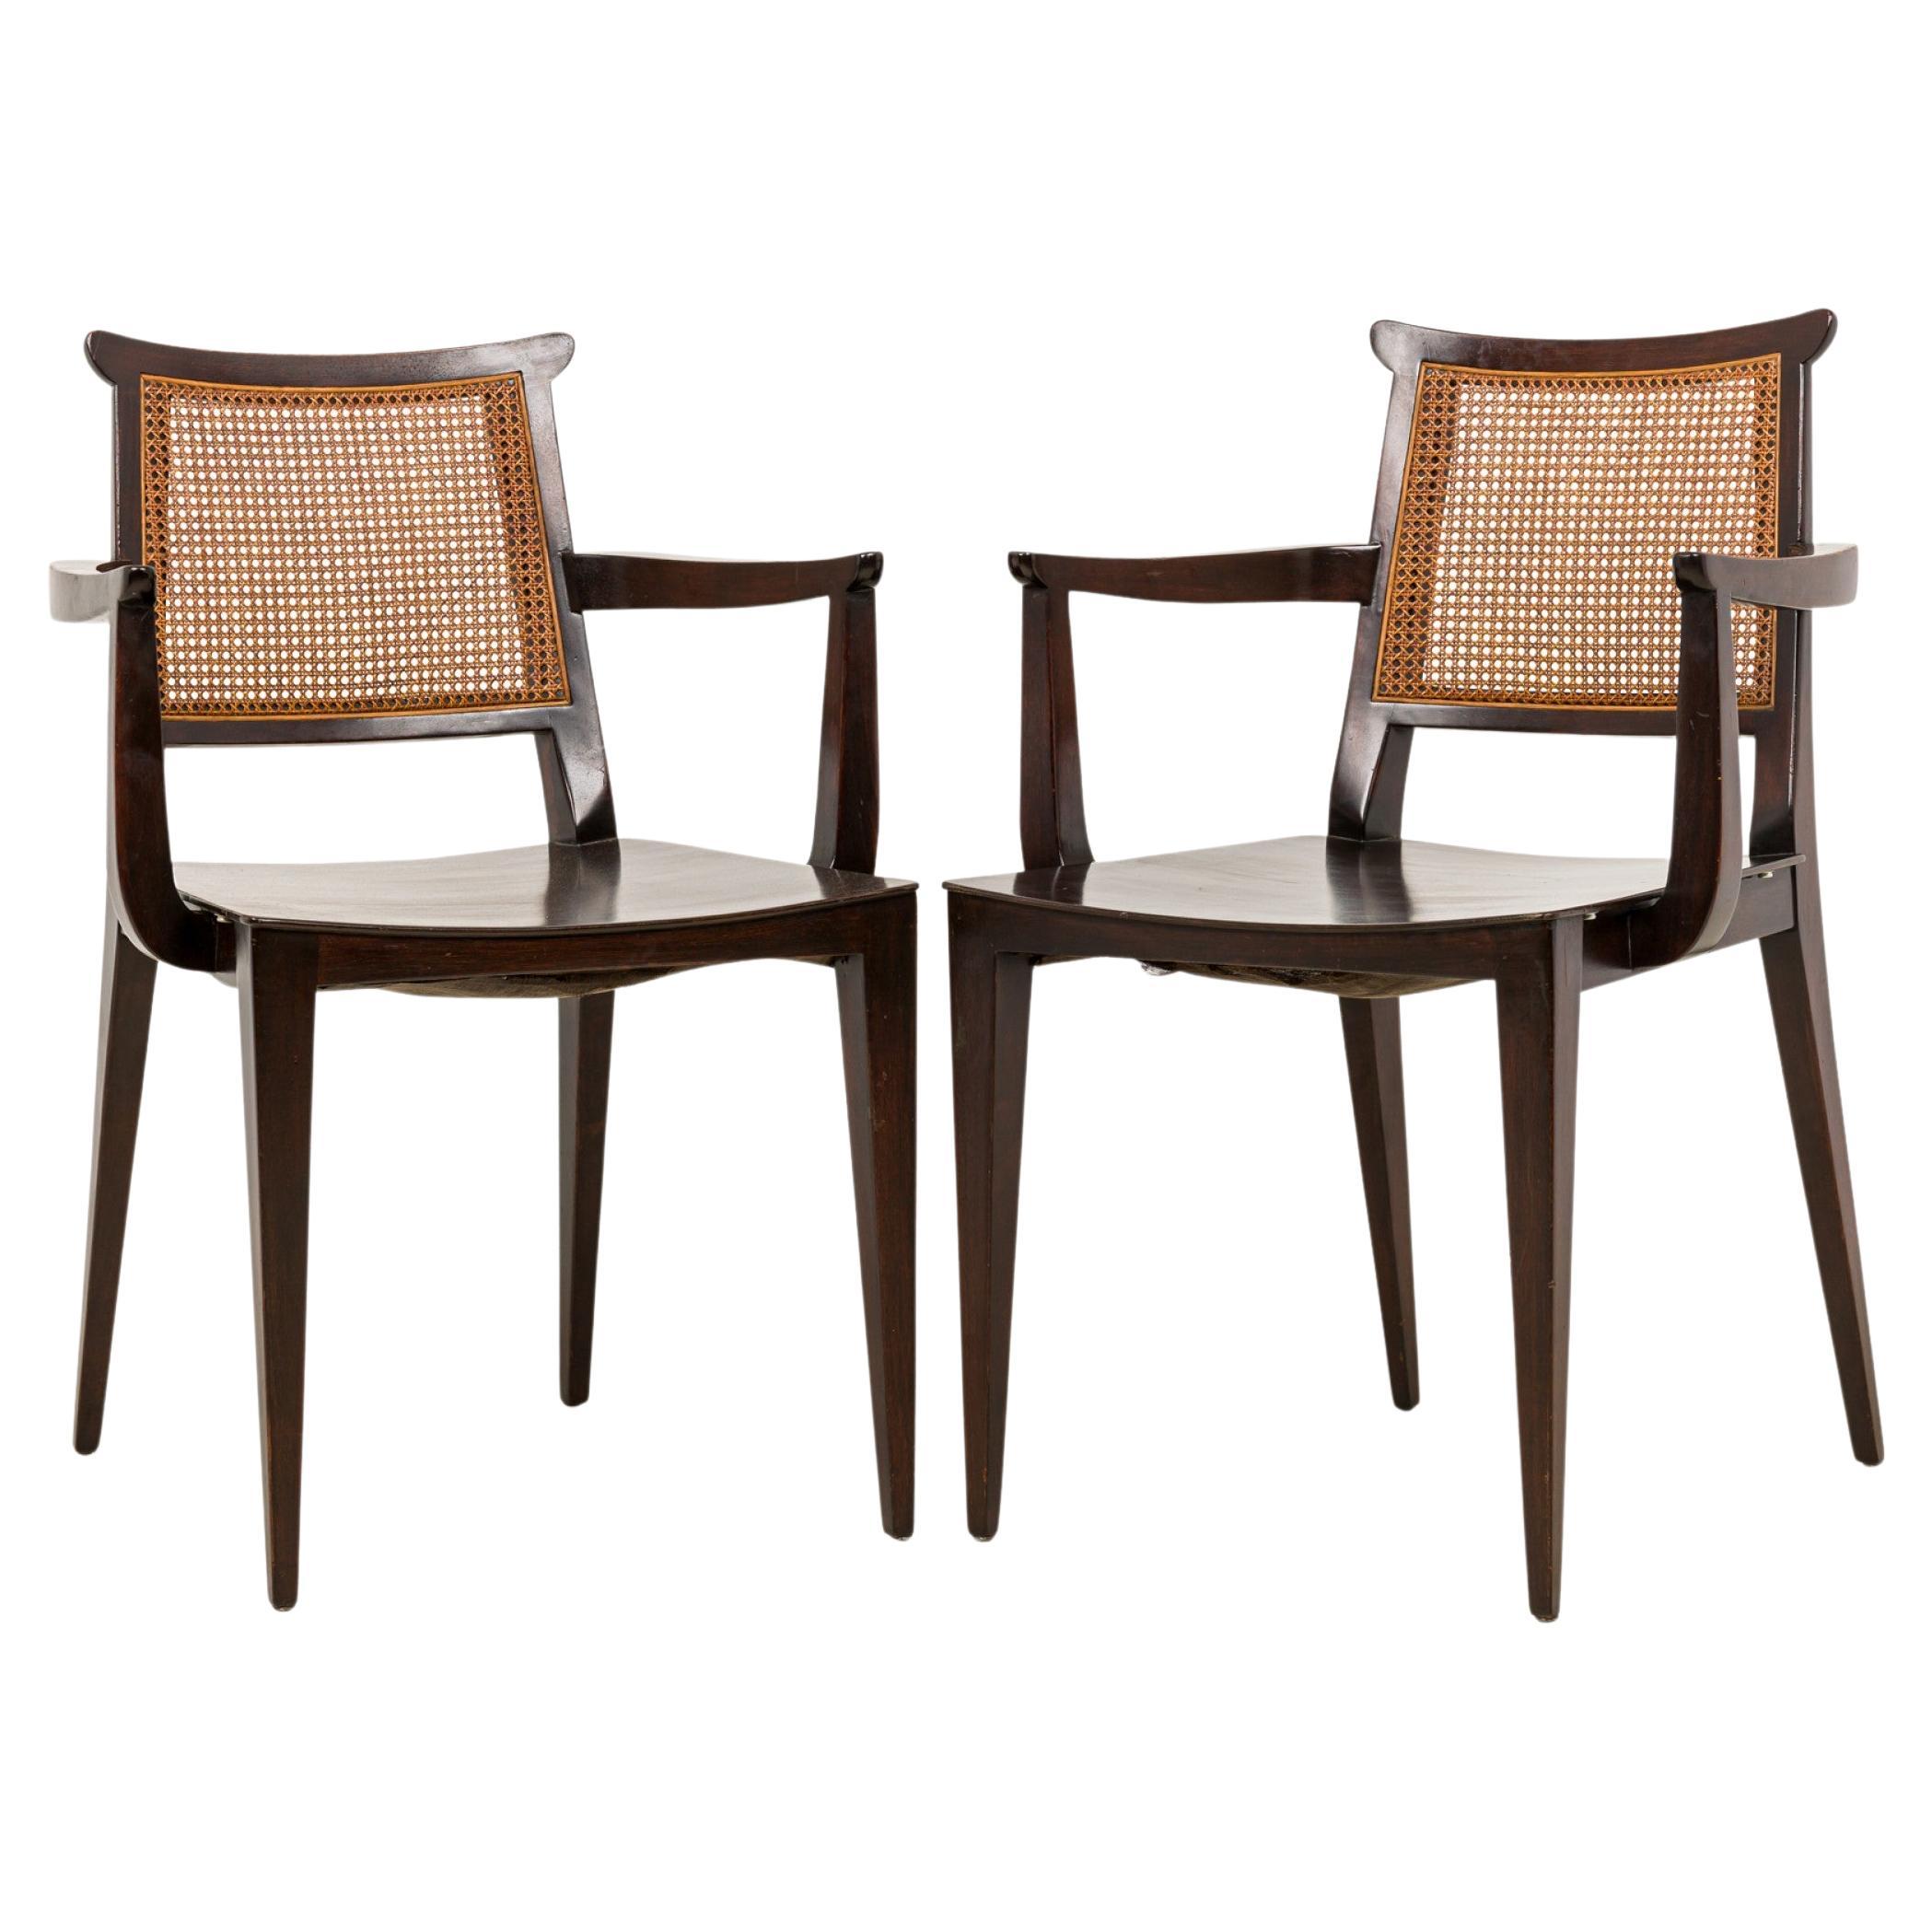 Set of 4 Edward Wormley for Dunbar Mid-Century Caned Back Wooden Dining Armchair